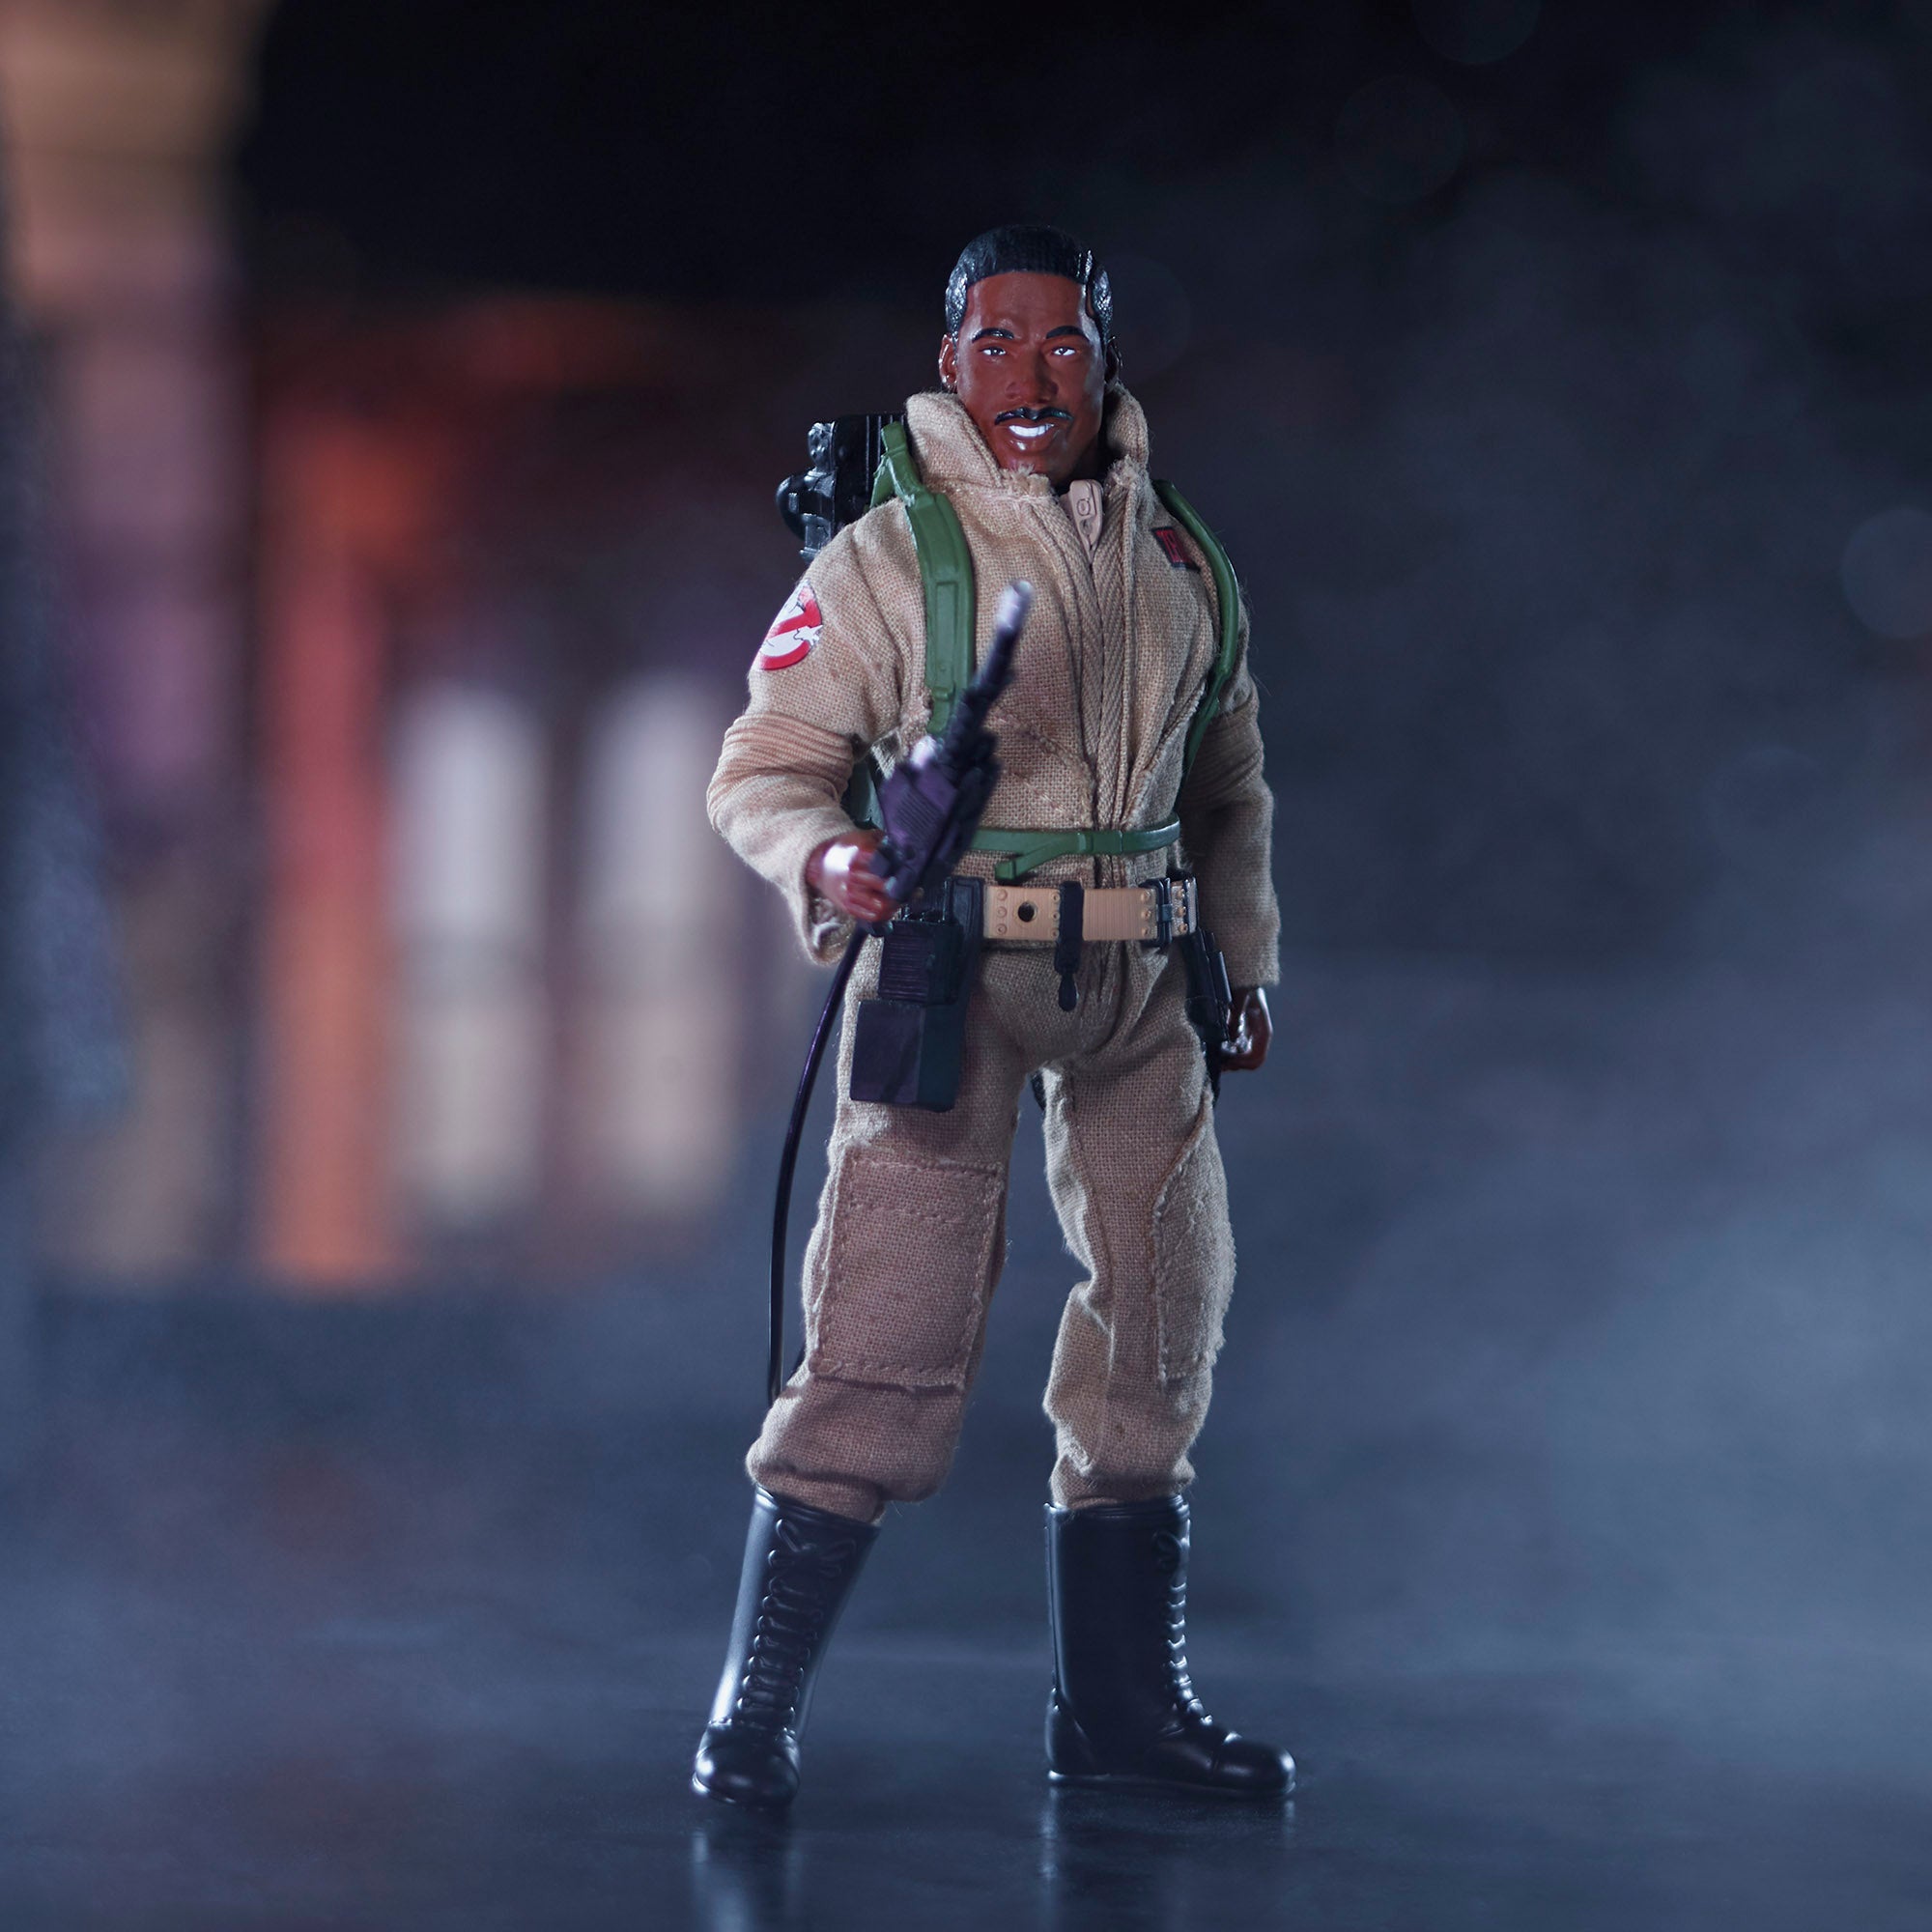 Ghostbusters x Mego 13